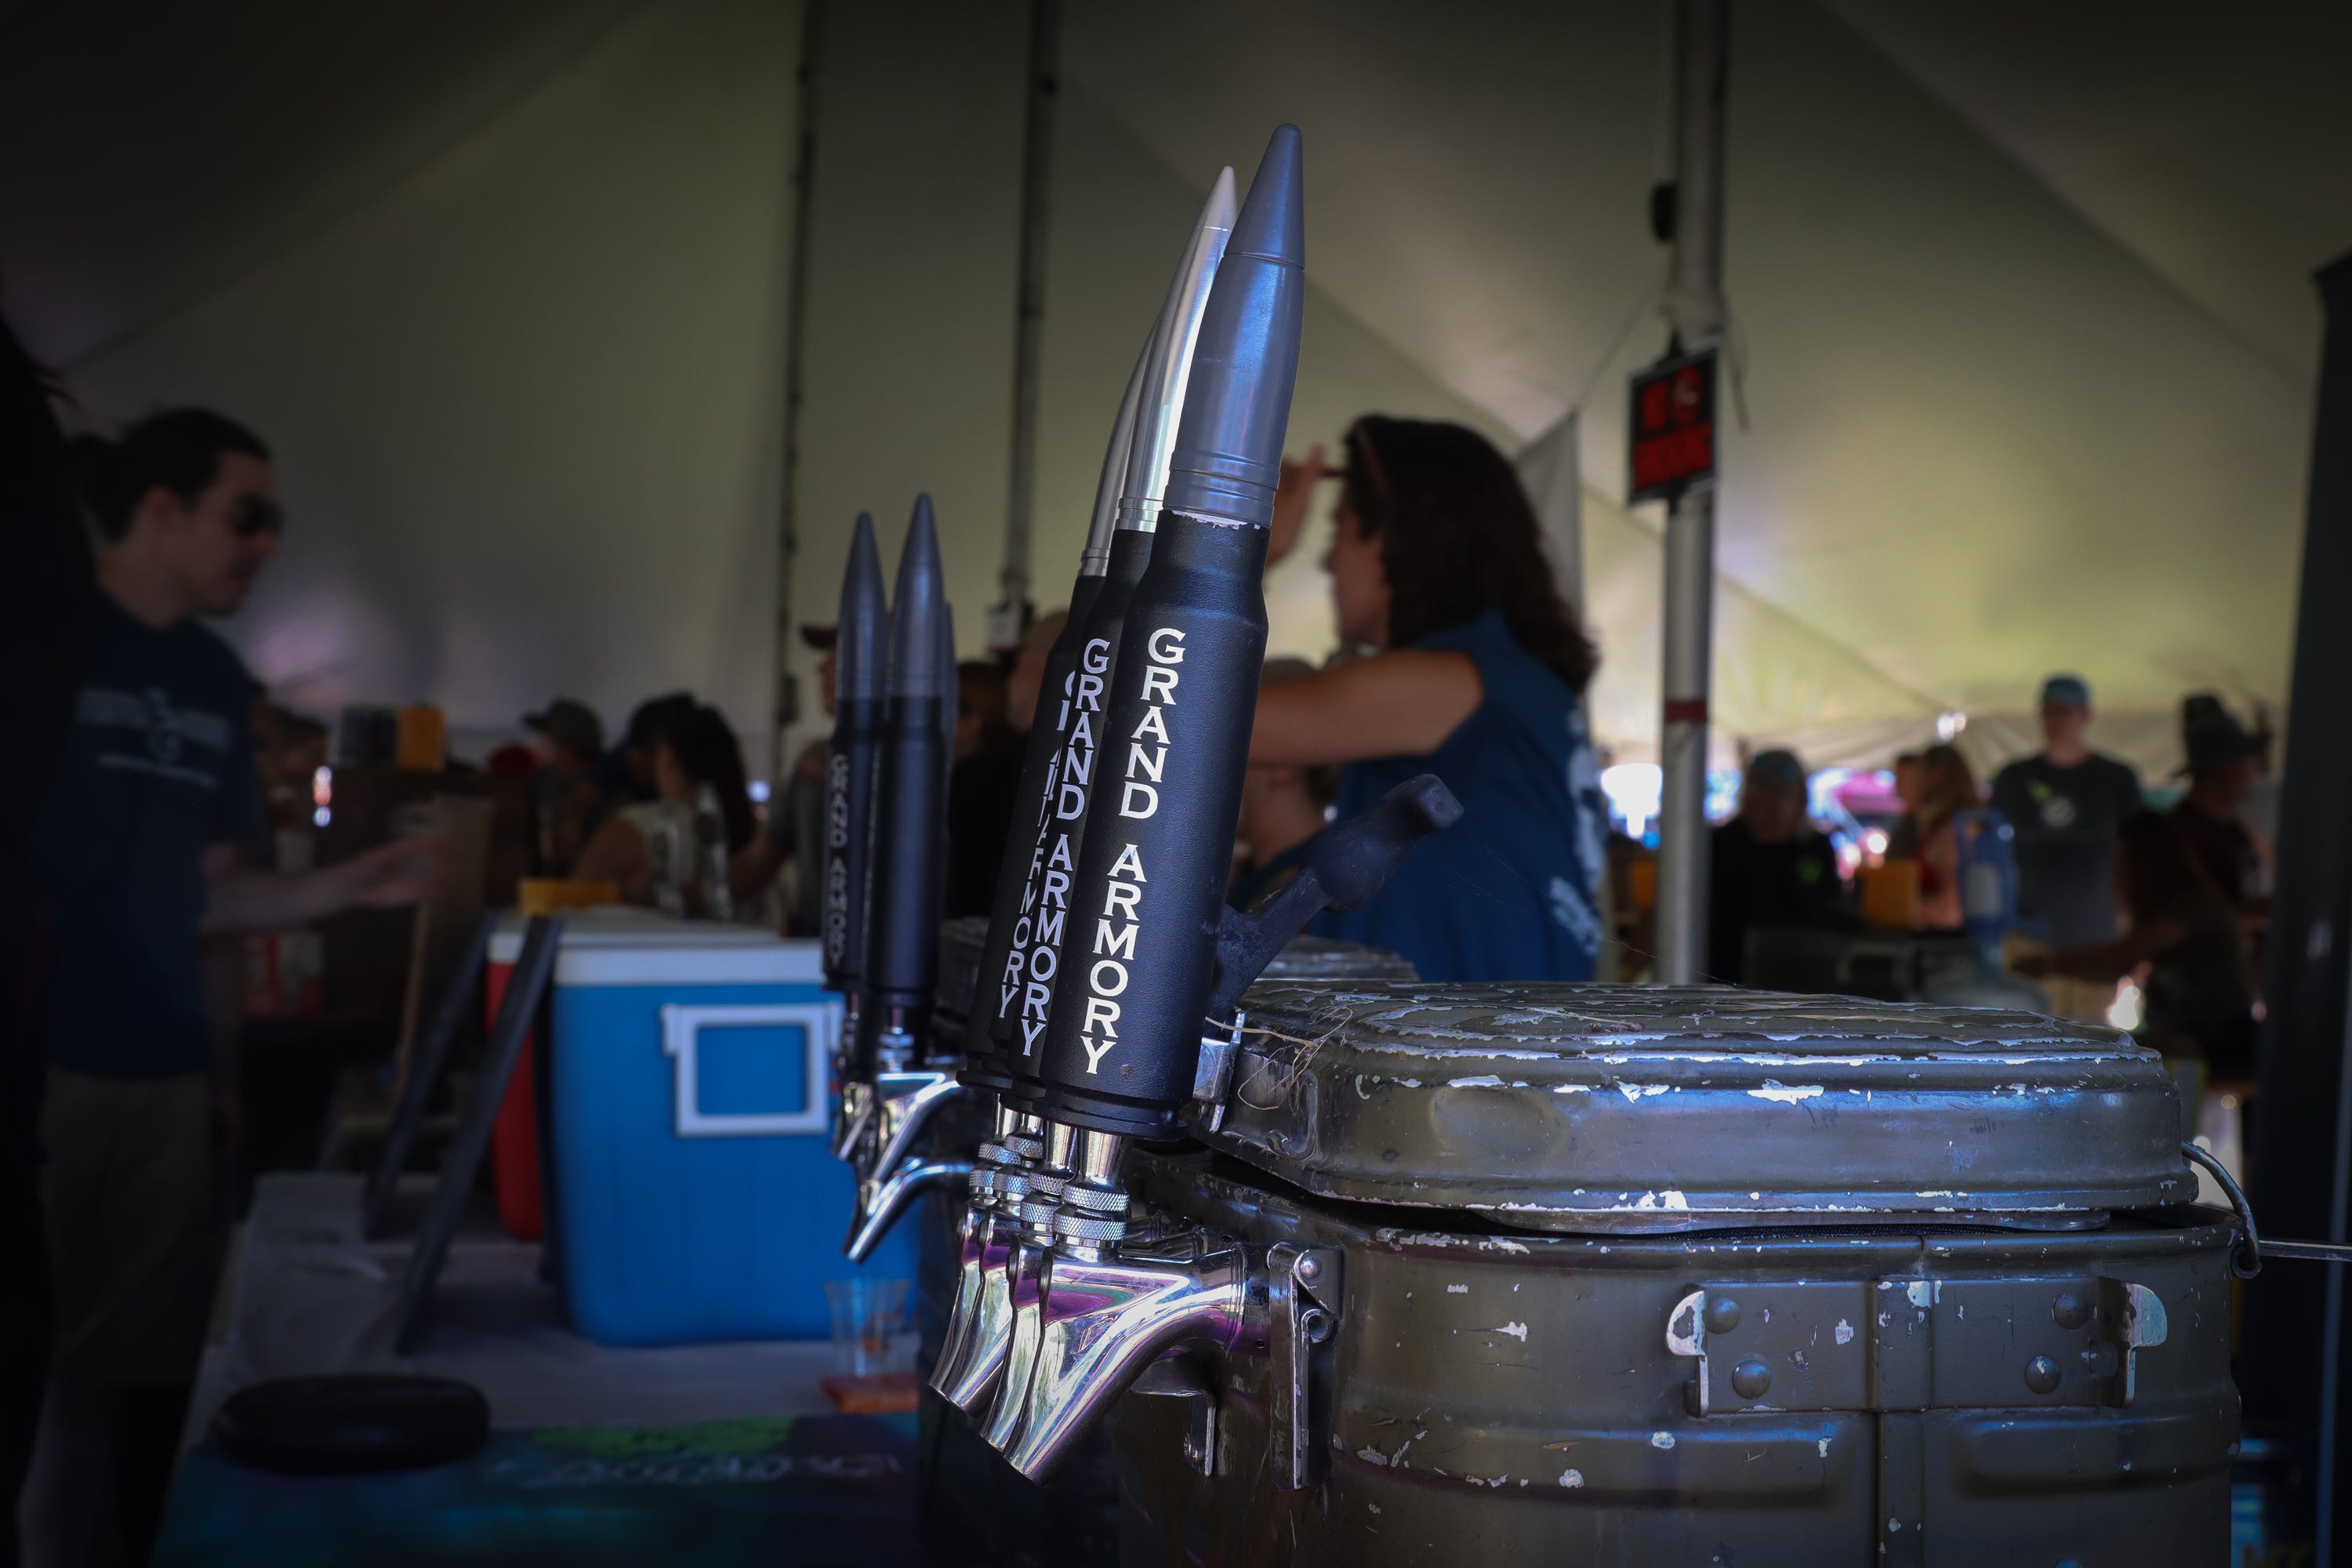 A close-up look at the military-themed beer tap handles at the stand of Grand Armory Brewing at the Michigan Brewers Guild Summer Beer Festival on Friday, July 22, 2022.